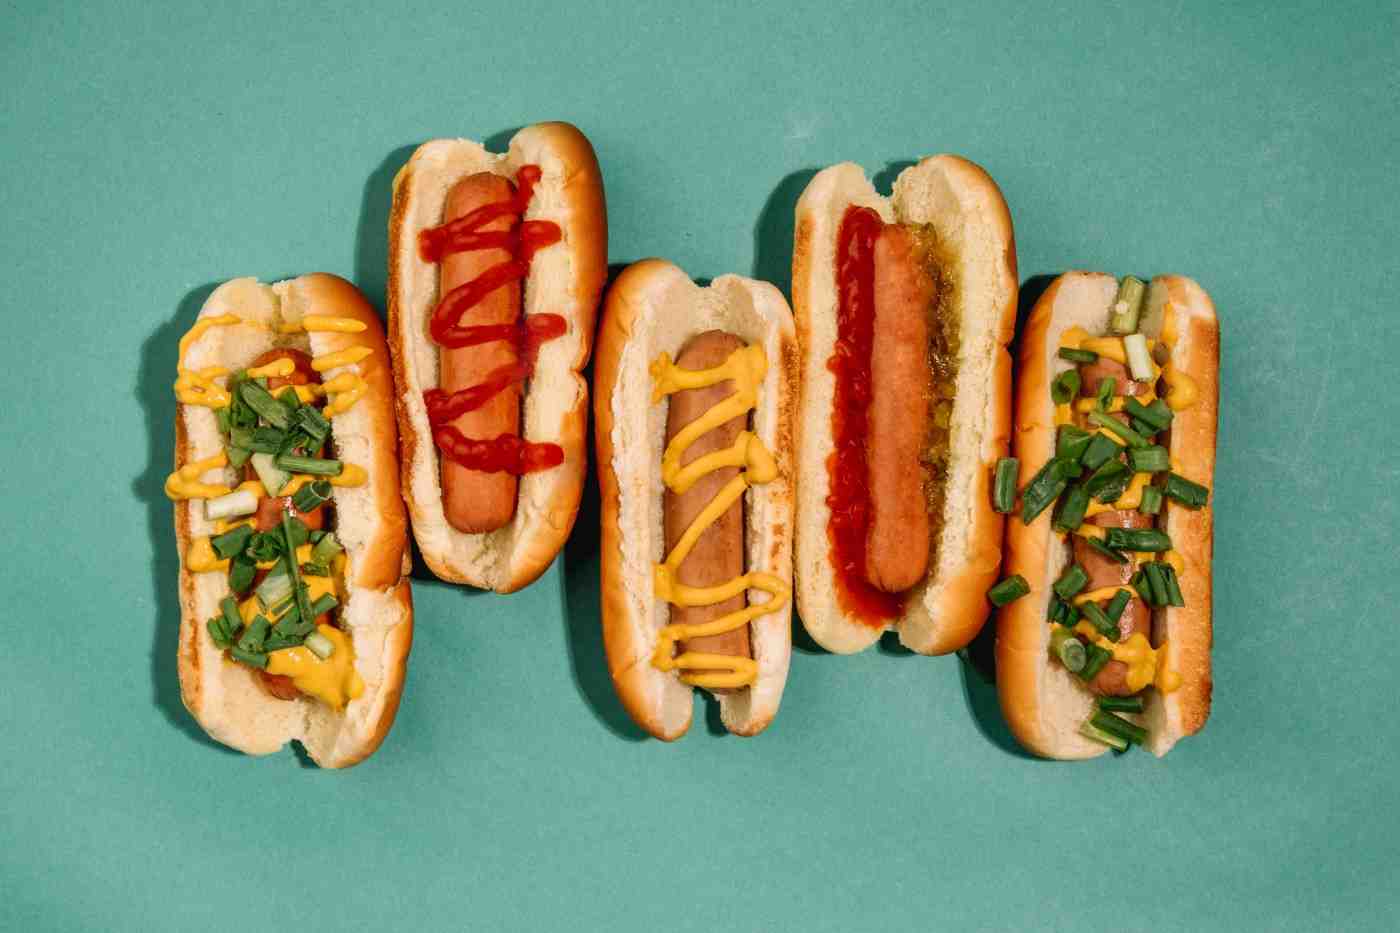 How many hotdogs should a person eat?